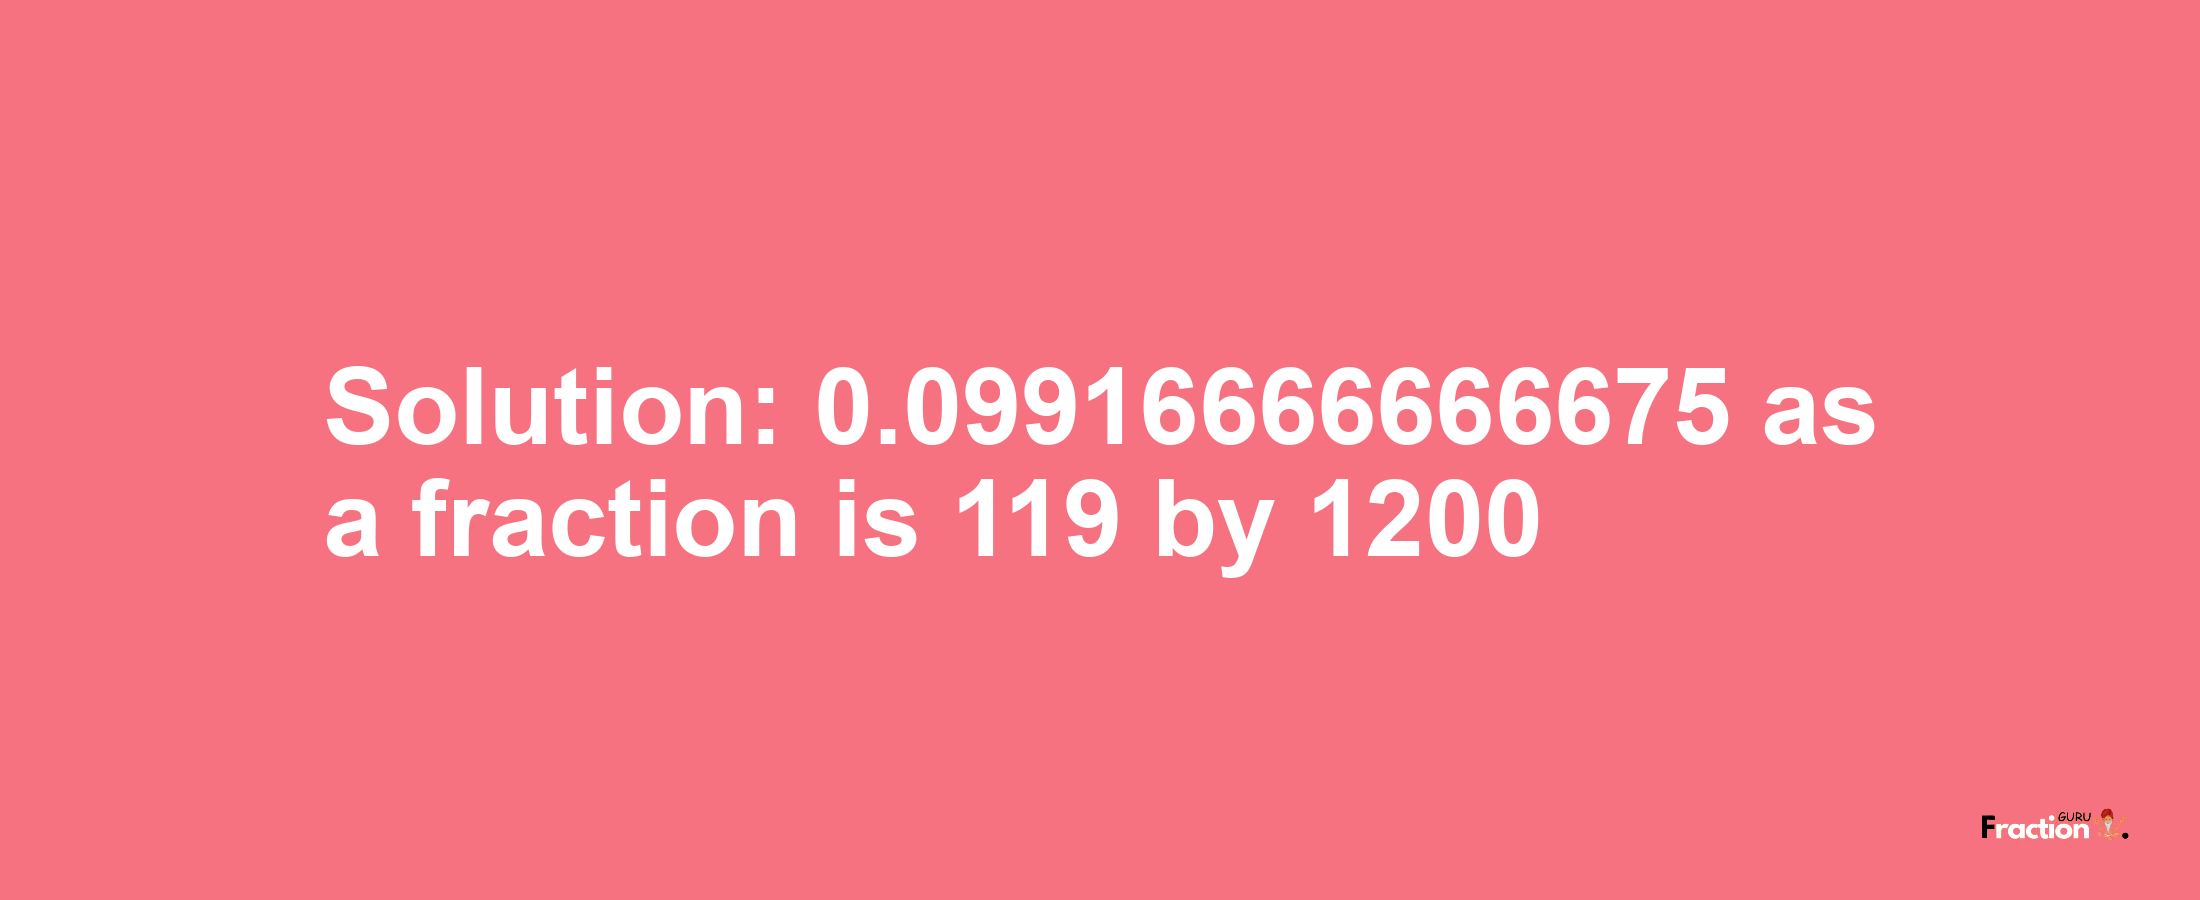 Solution:0.09916666666675 as a fraction is 119/1200